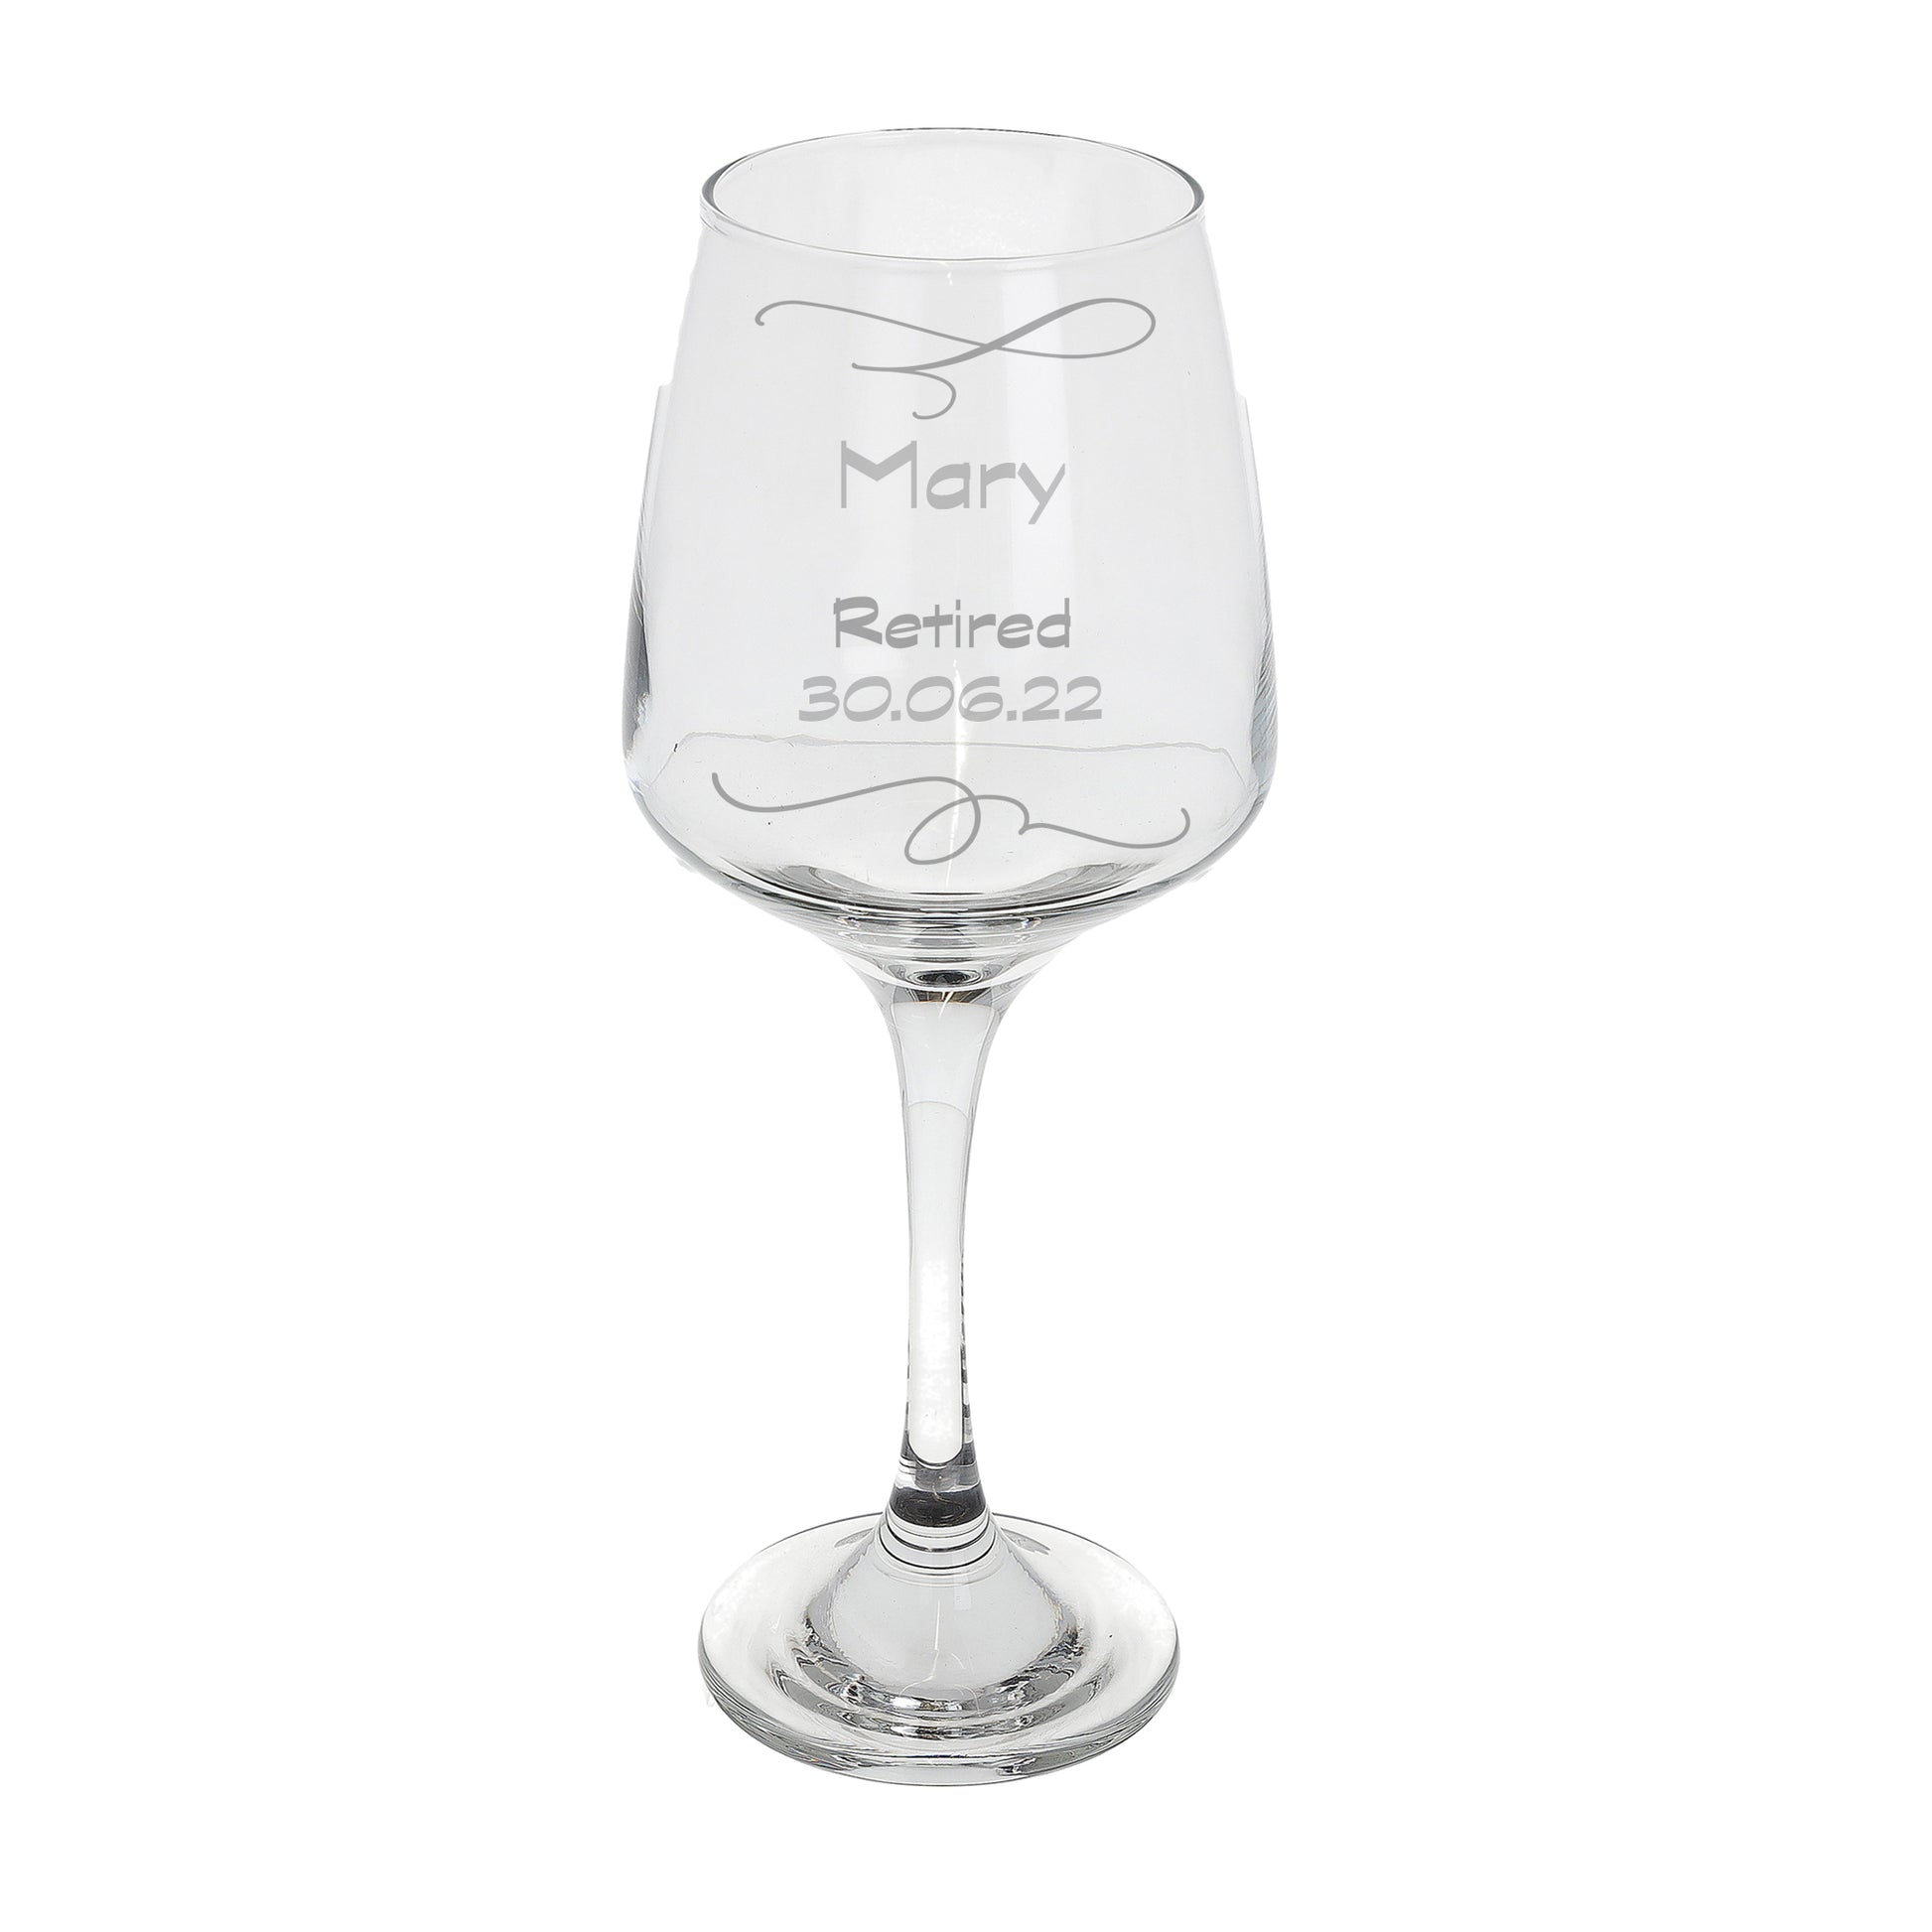 Personalised Engraved Wine Glass Retirement Gift  - Always Looking Good - Engraved Glass  